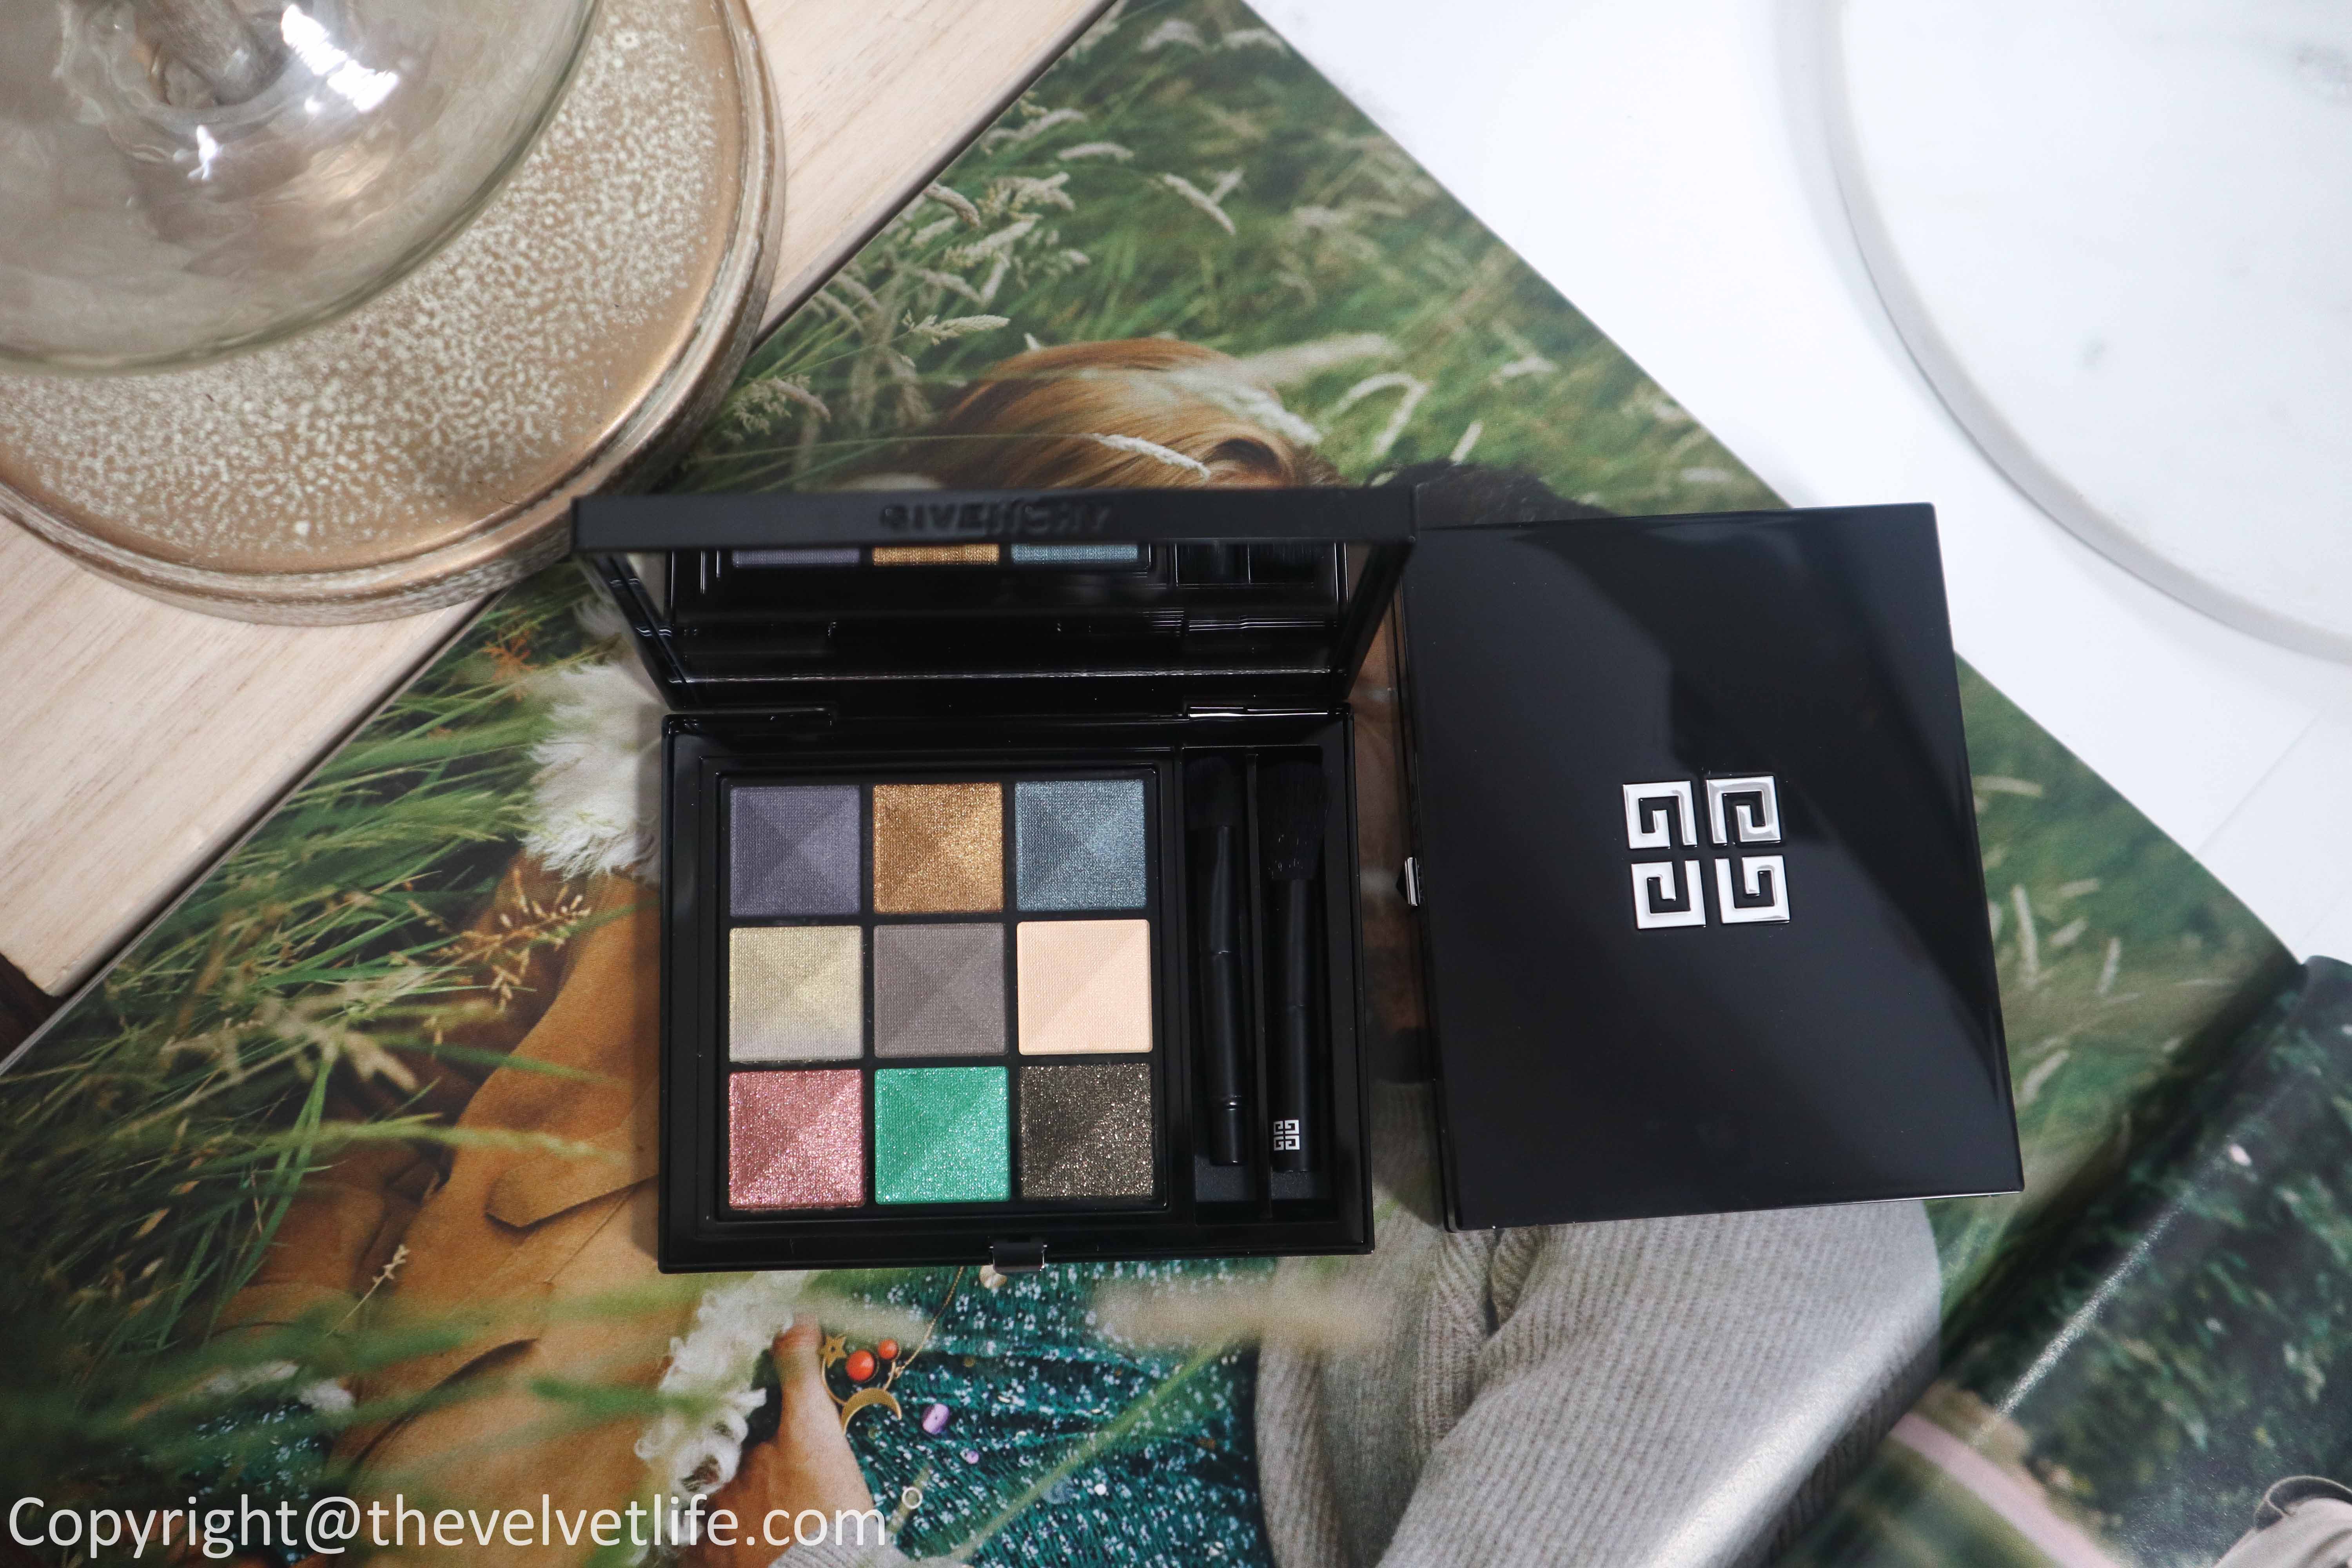 New Givenchy Le 9 De Givenchy Eyeshadow Palette review and swatches of harmony 9.02 and 9.05 